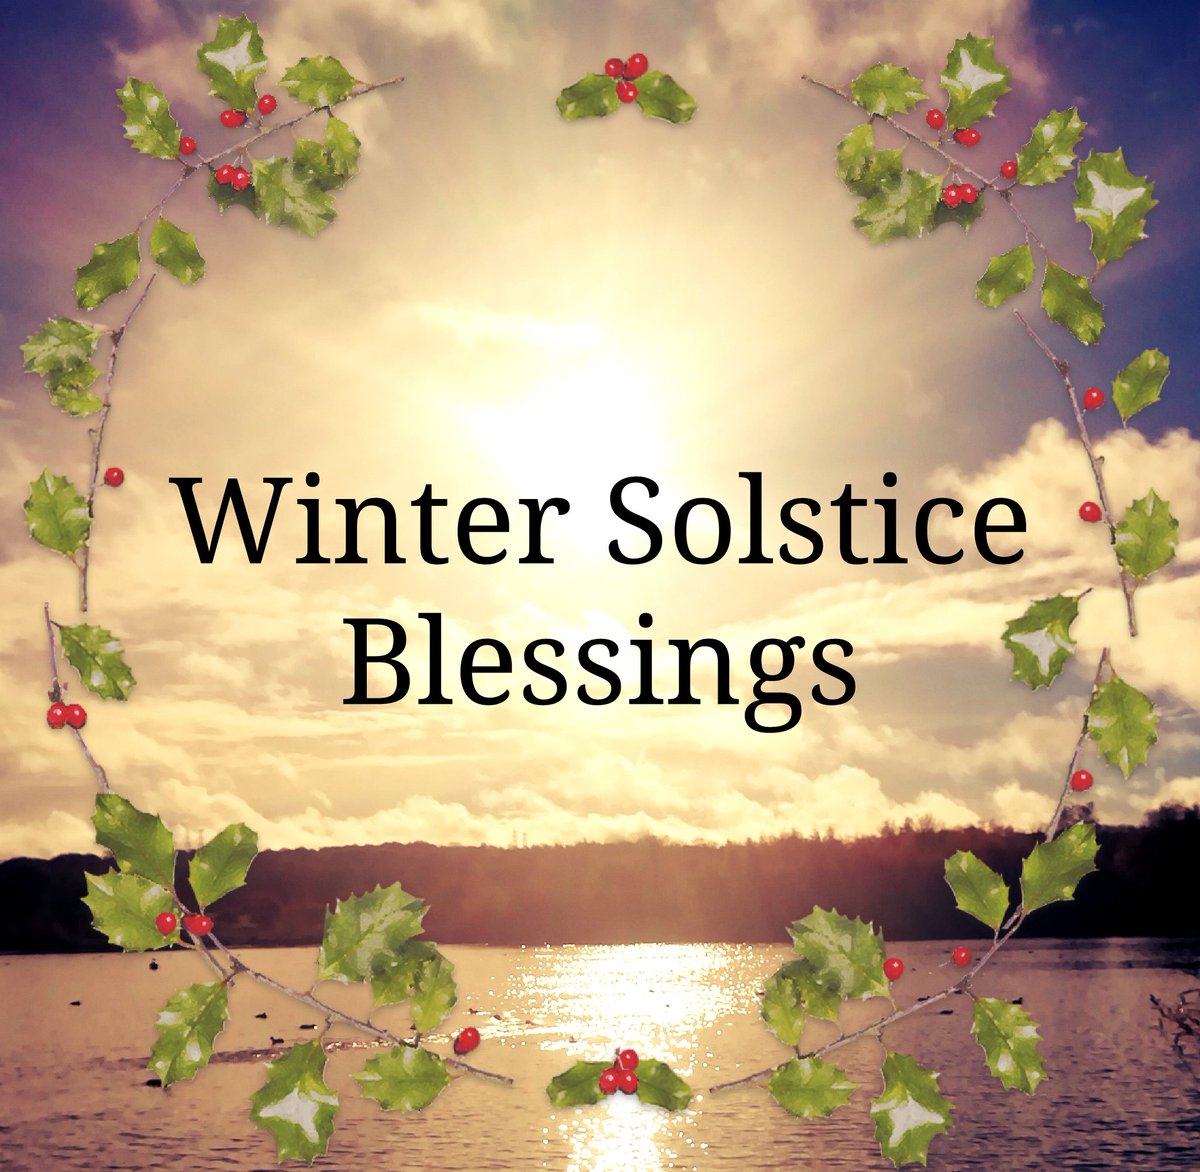 Wishing you all a break from the heavy duties of life, as the light starts to win over the dark once more♥️
#solsticeblessings #WinterSolstice #WinterWitches